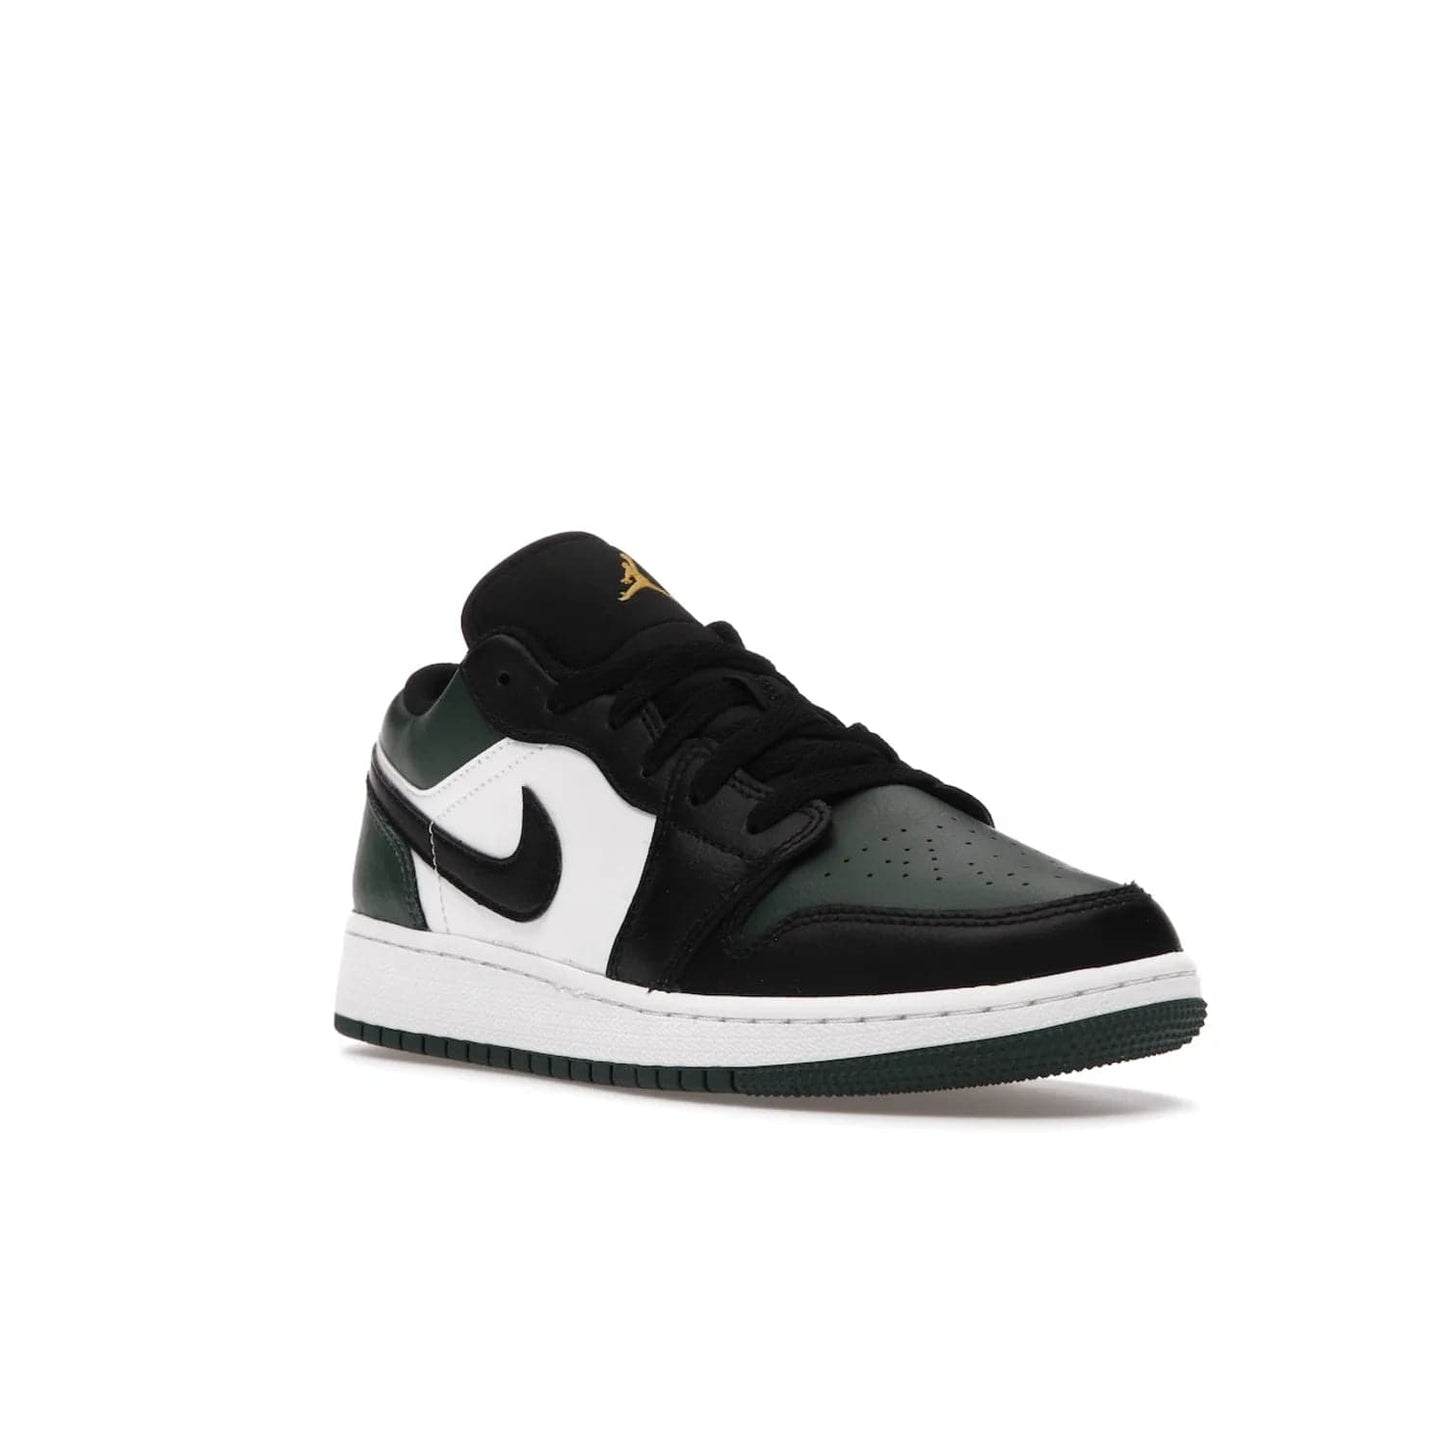 Jordan 1 Low Green Toe (GS) - Image 6 - Only at www.BallersClubKickz.com - Get the perfect low cut Jordans. Shop the Air Jordan 1 Low Noble Green GS shoes with its unique colorway and stencil Jumpman logo. Available October 2021.